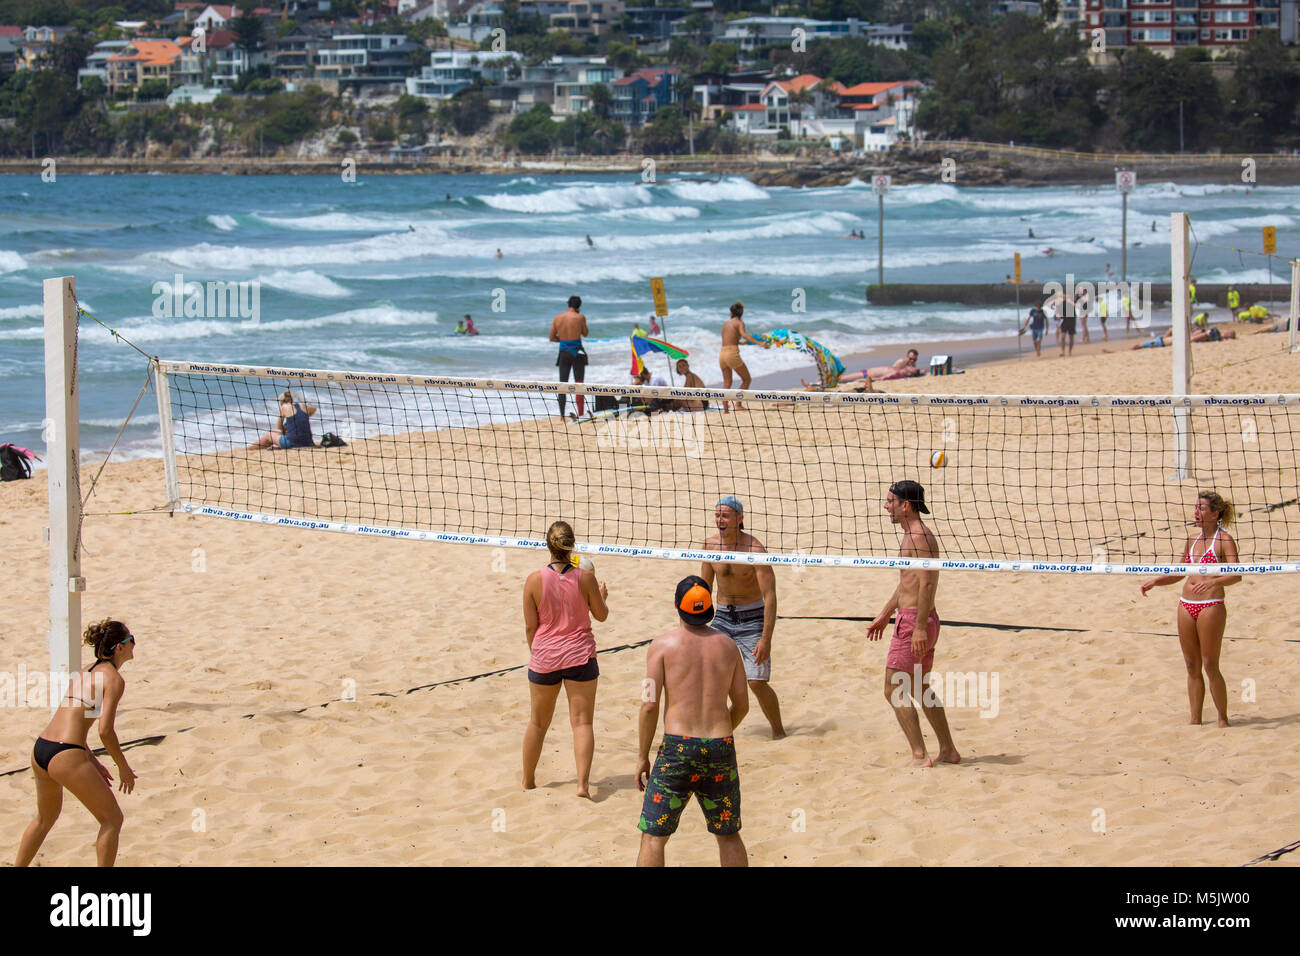 People playing beach volleyball on Manly beach in Sydney, New South Wales,Australia Stock Photo